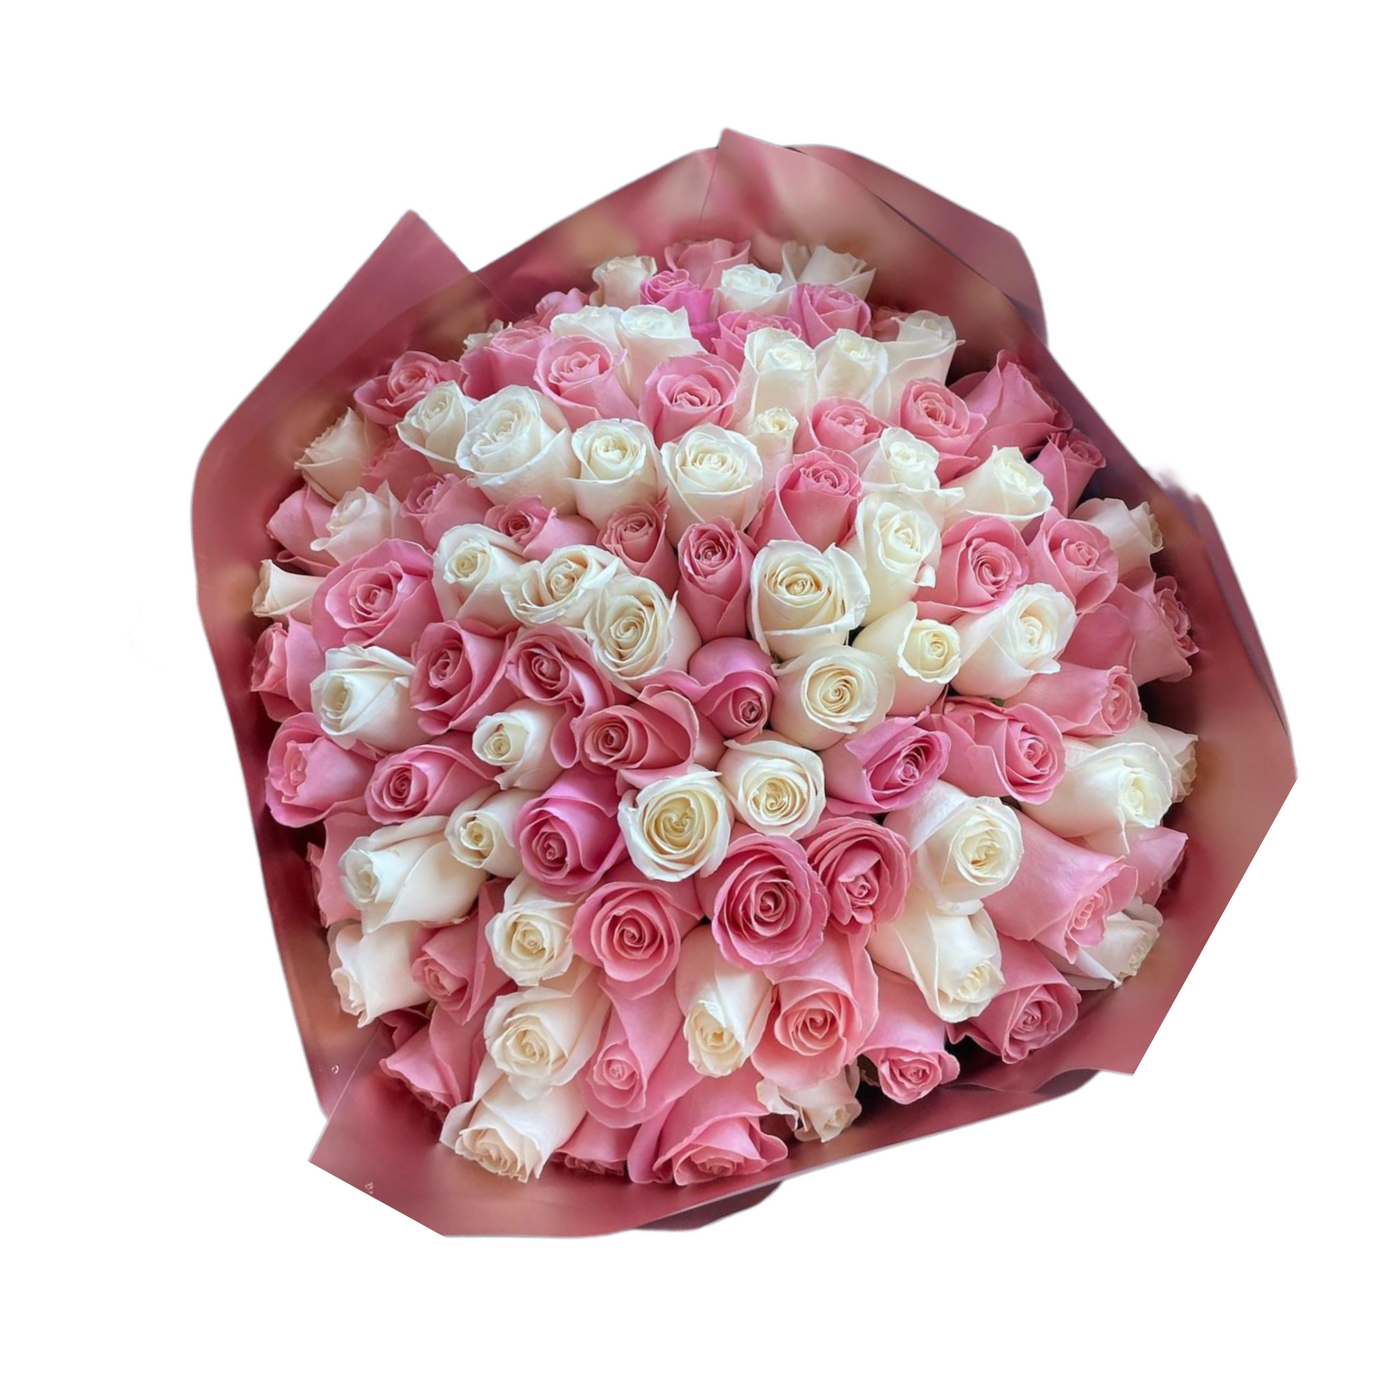 100 Pink & White Roses Bouquet